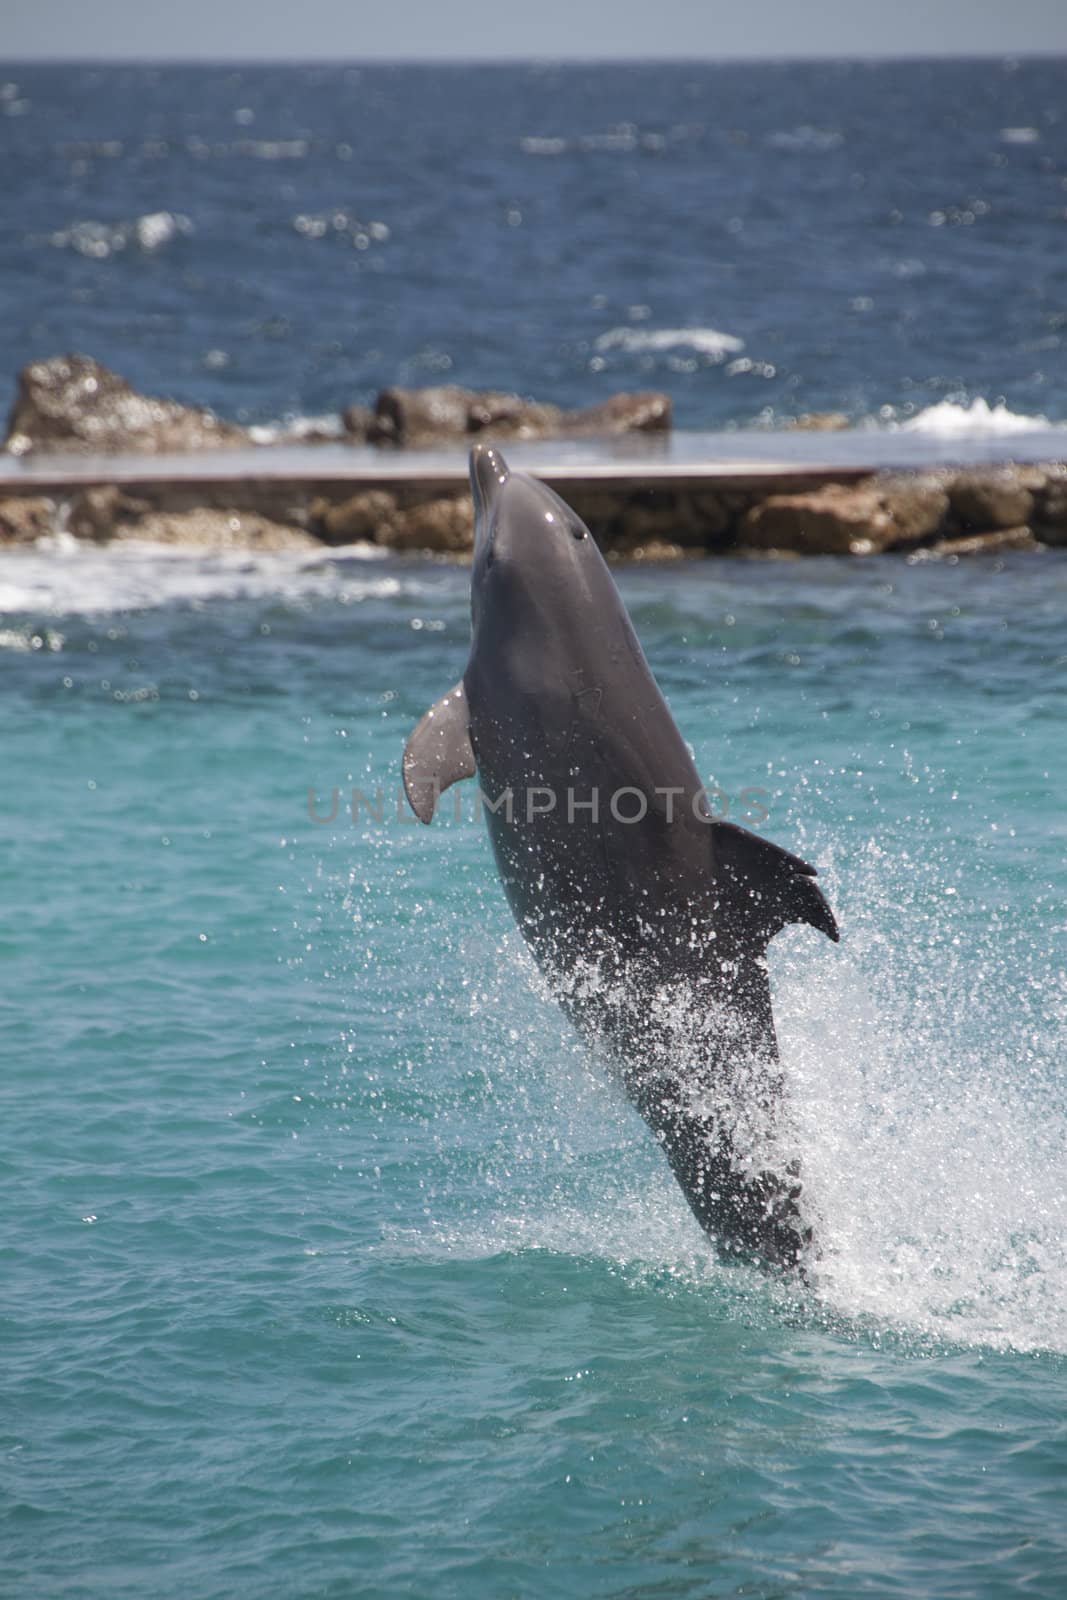 Dolphin showing off in the Caribbean water by tjwvandongen